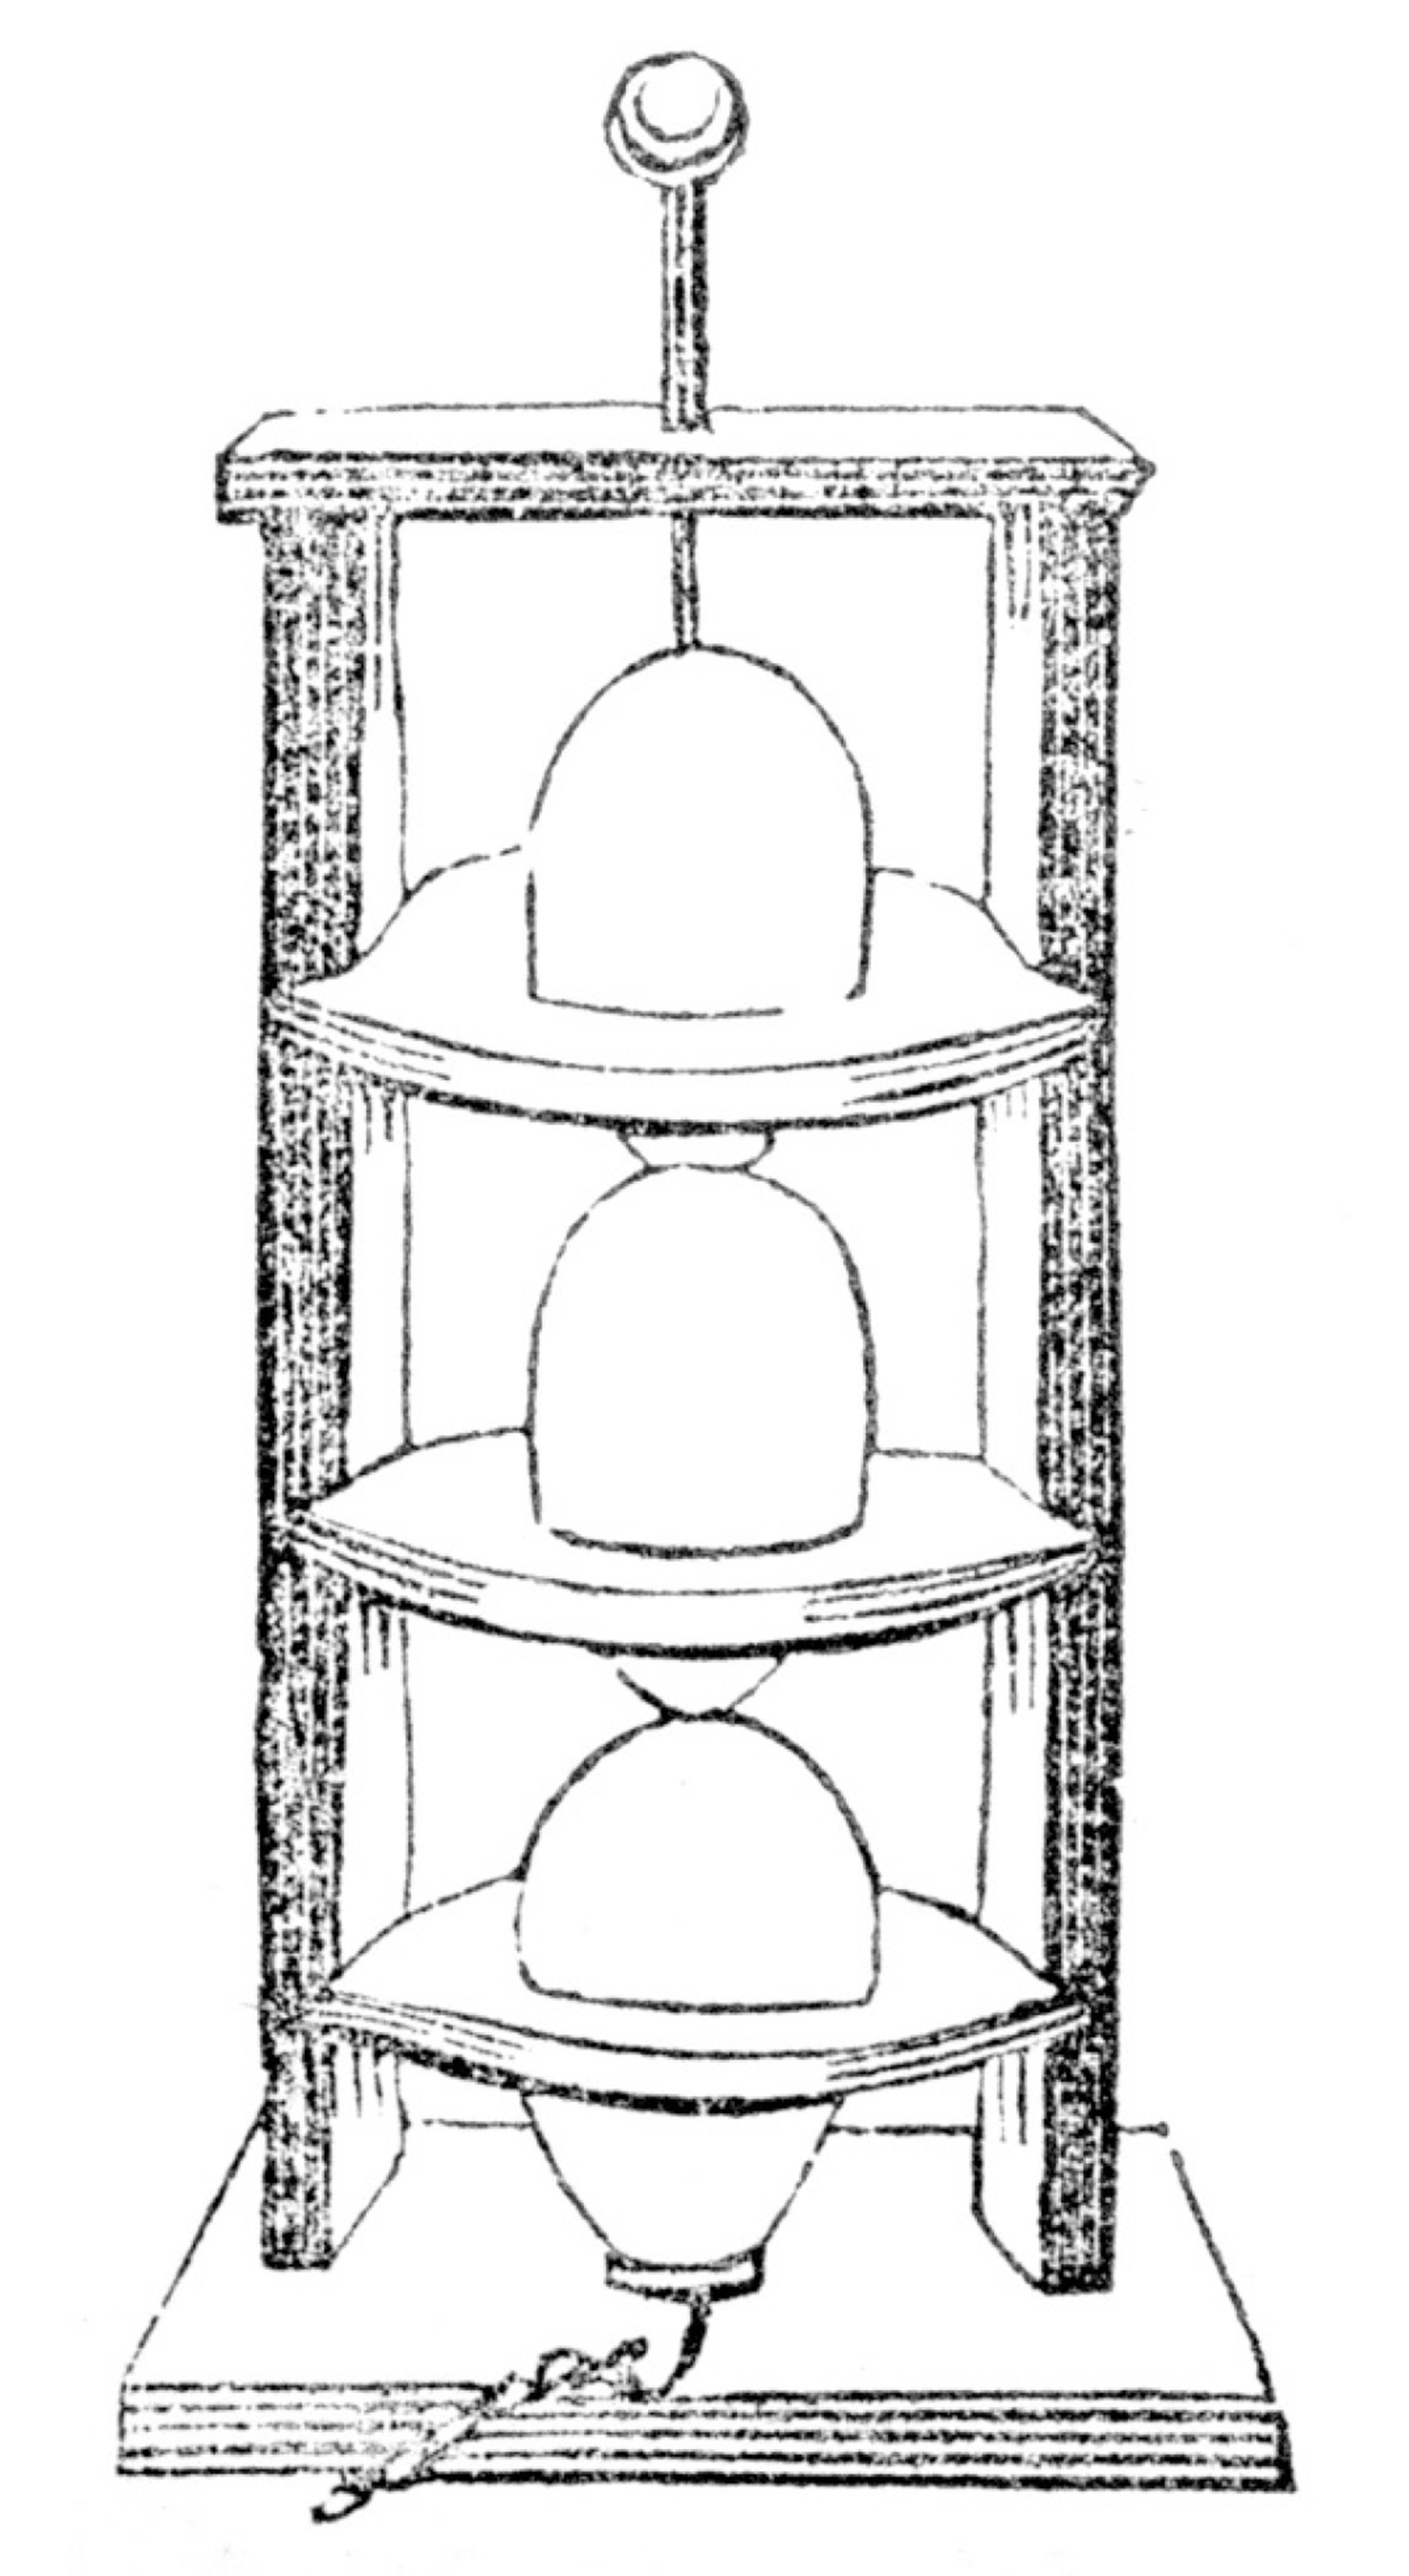 A diagram of the electrical egg stand.